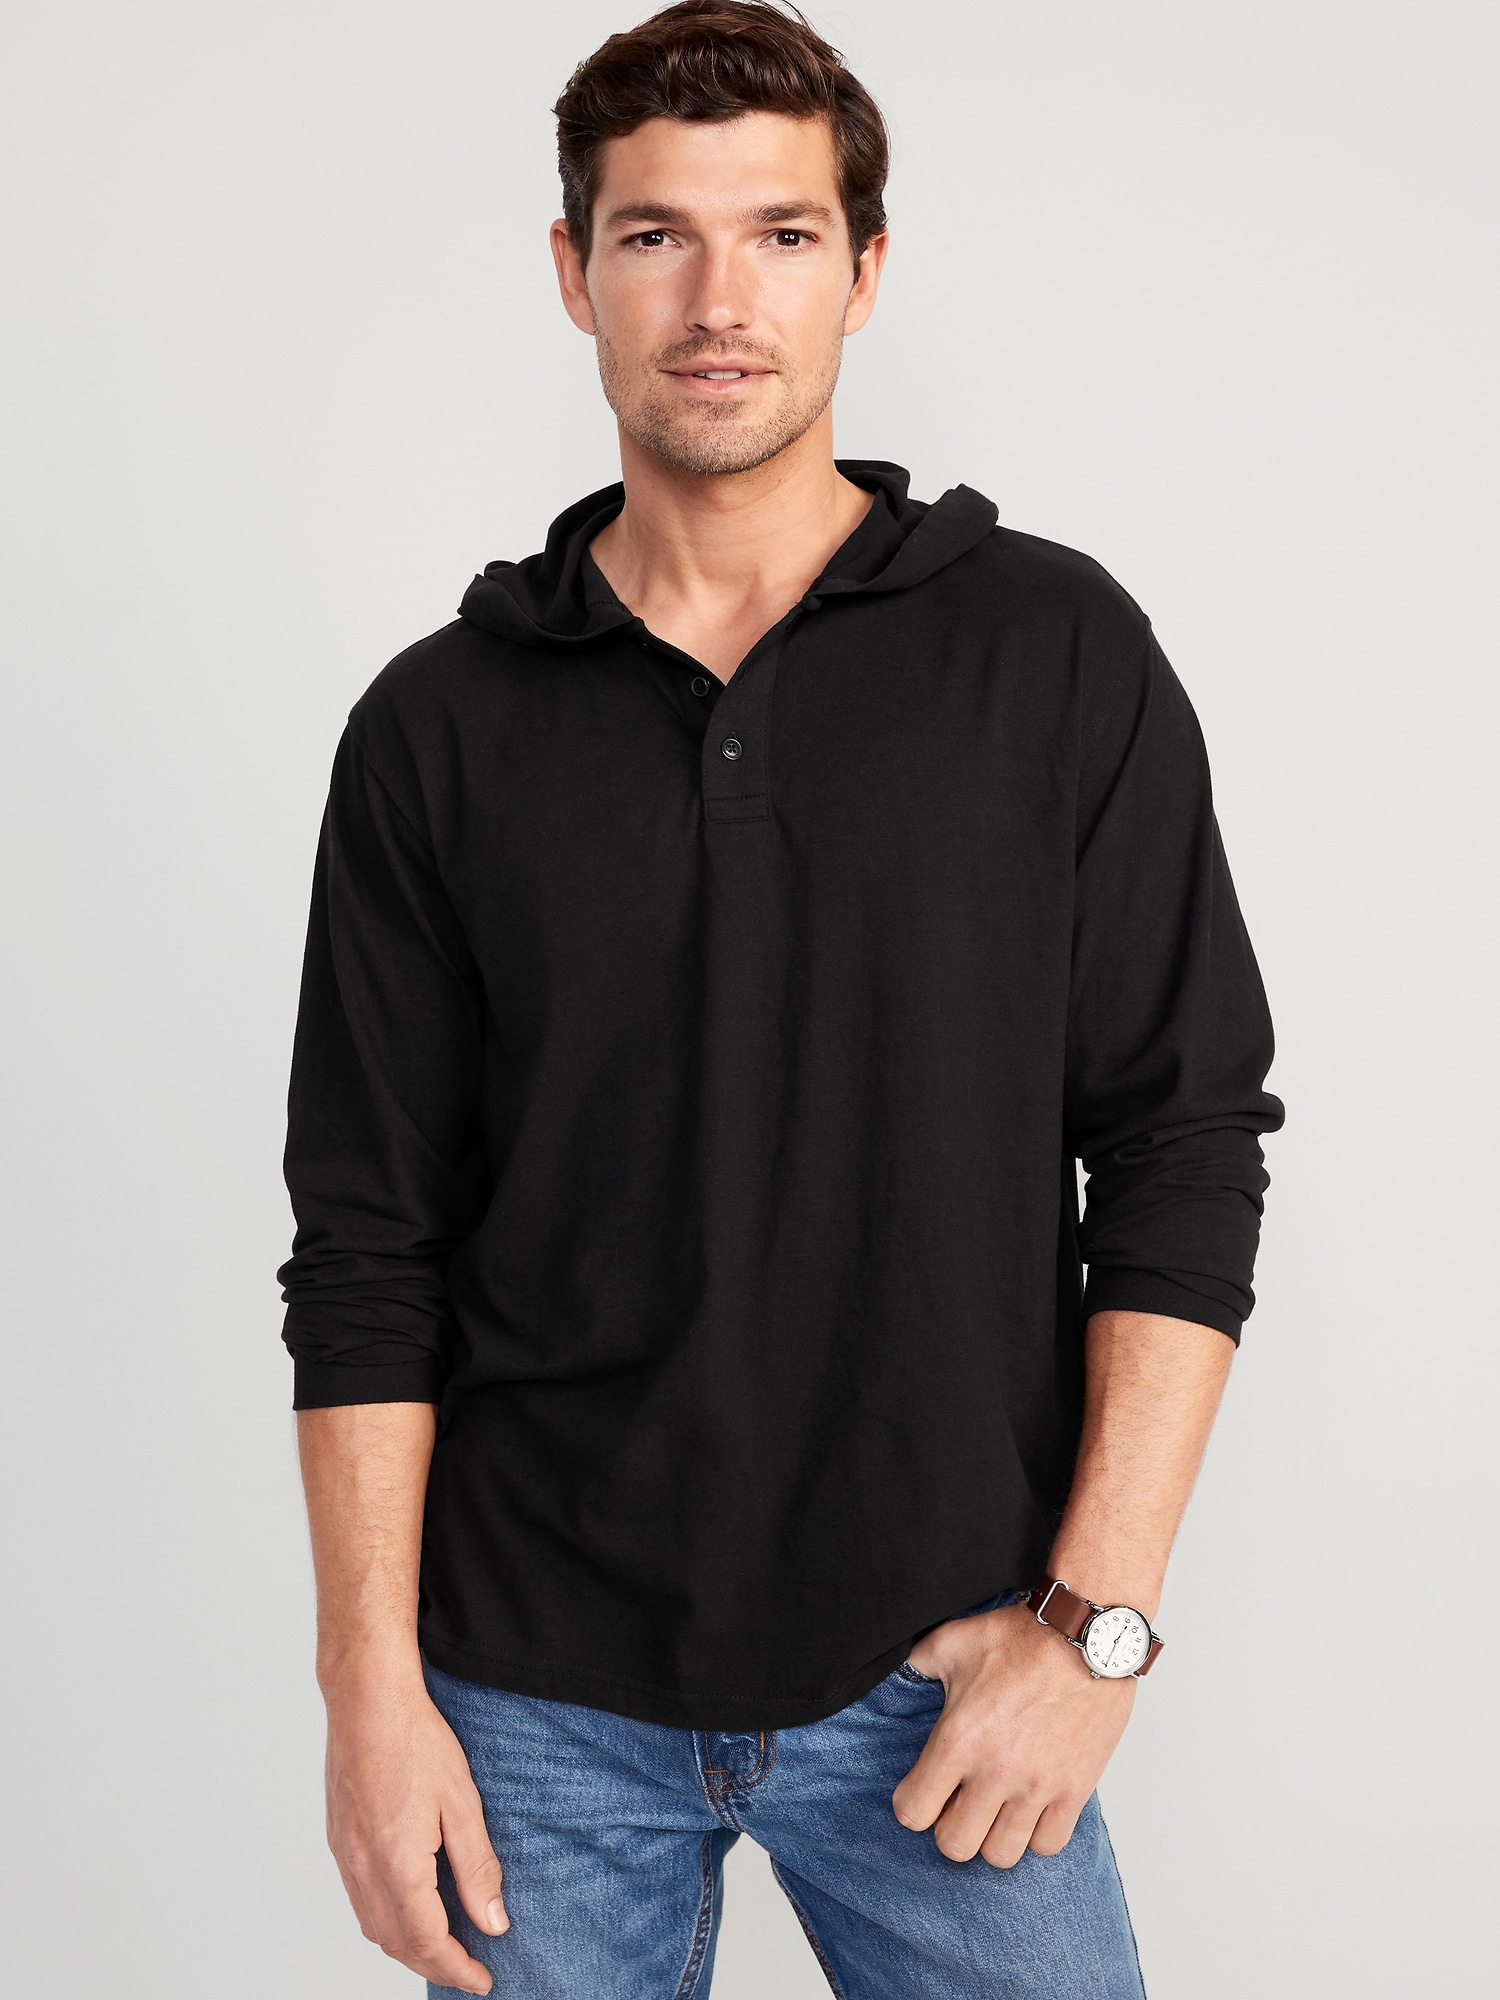 Old Navy Long-Sleeve Jersey Pullover Hoodie for Men black. 1